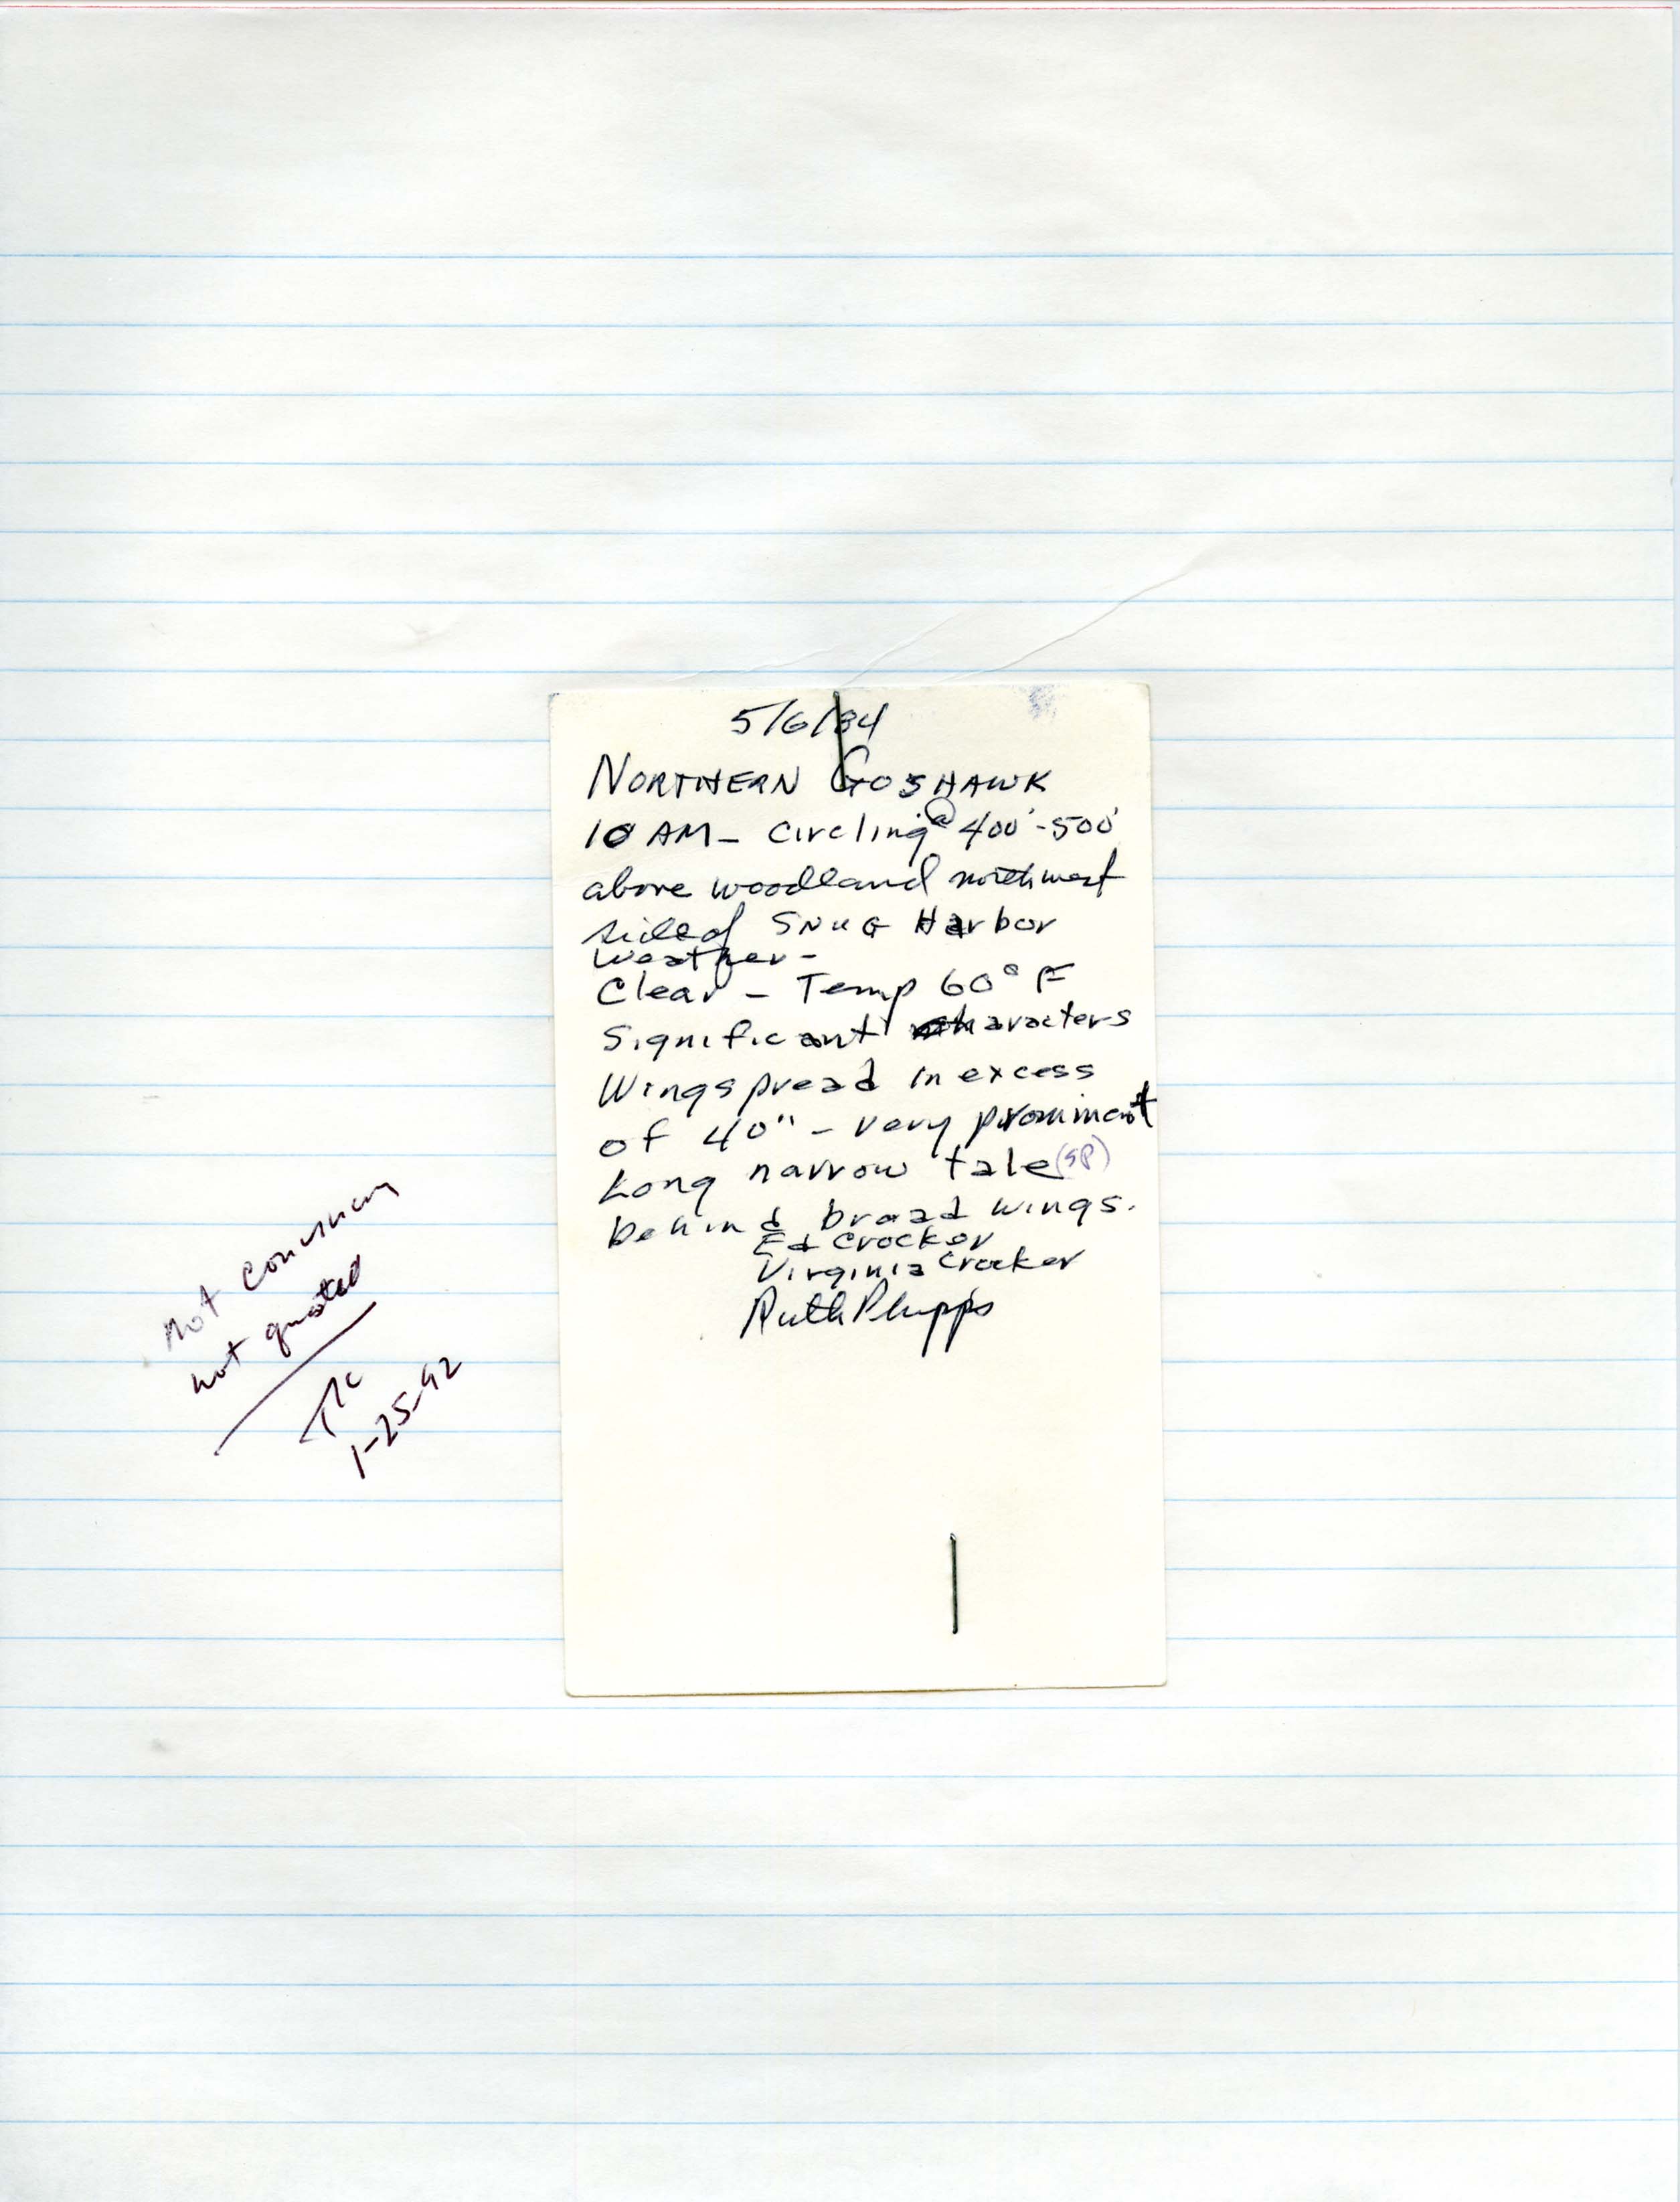 Note by Ruth Phipps detailing Northern Goshawk sighting, May 6, 1984